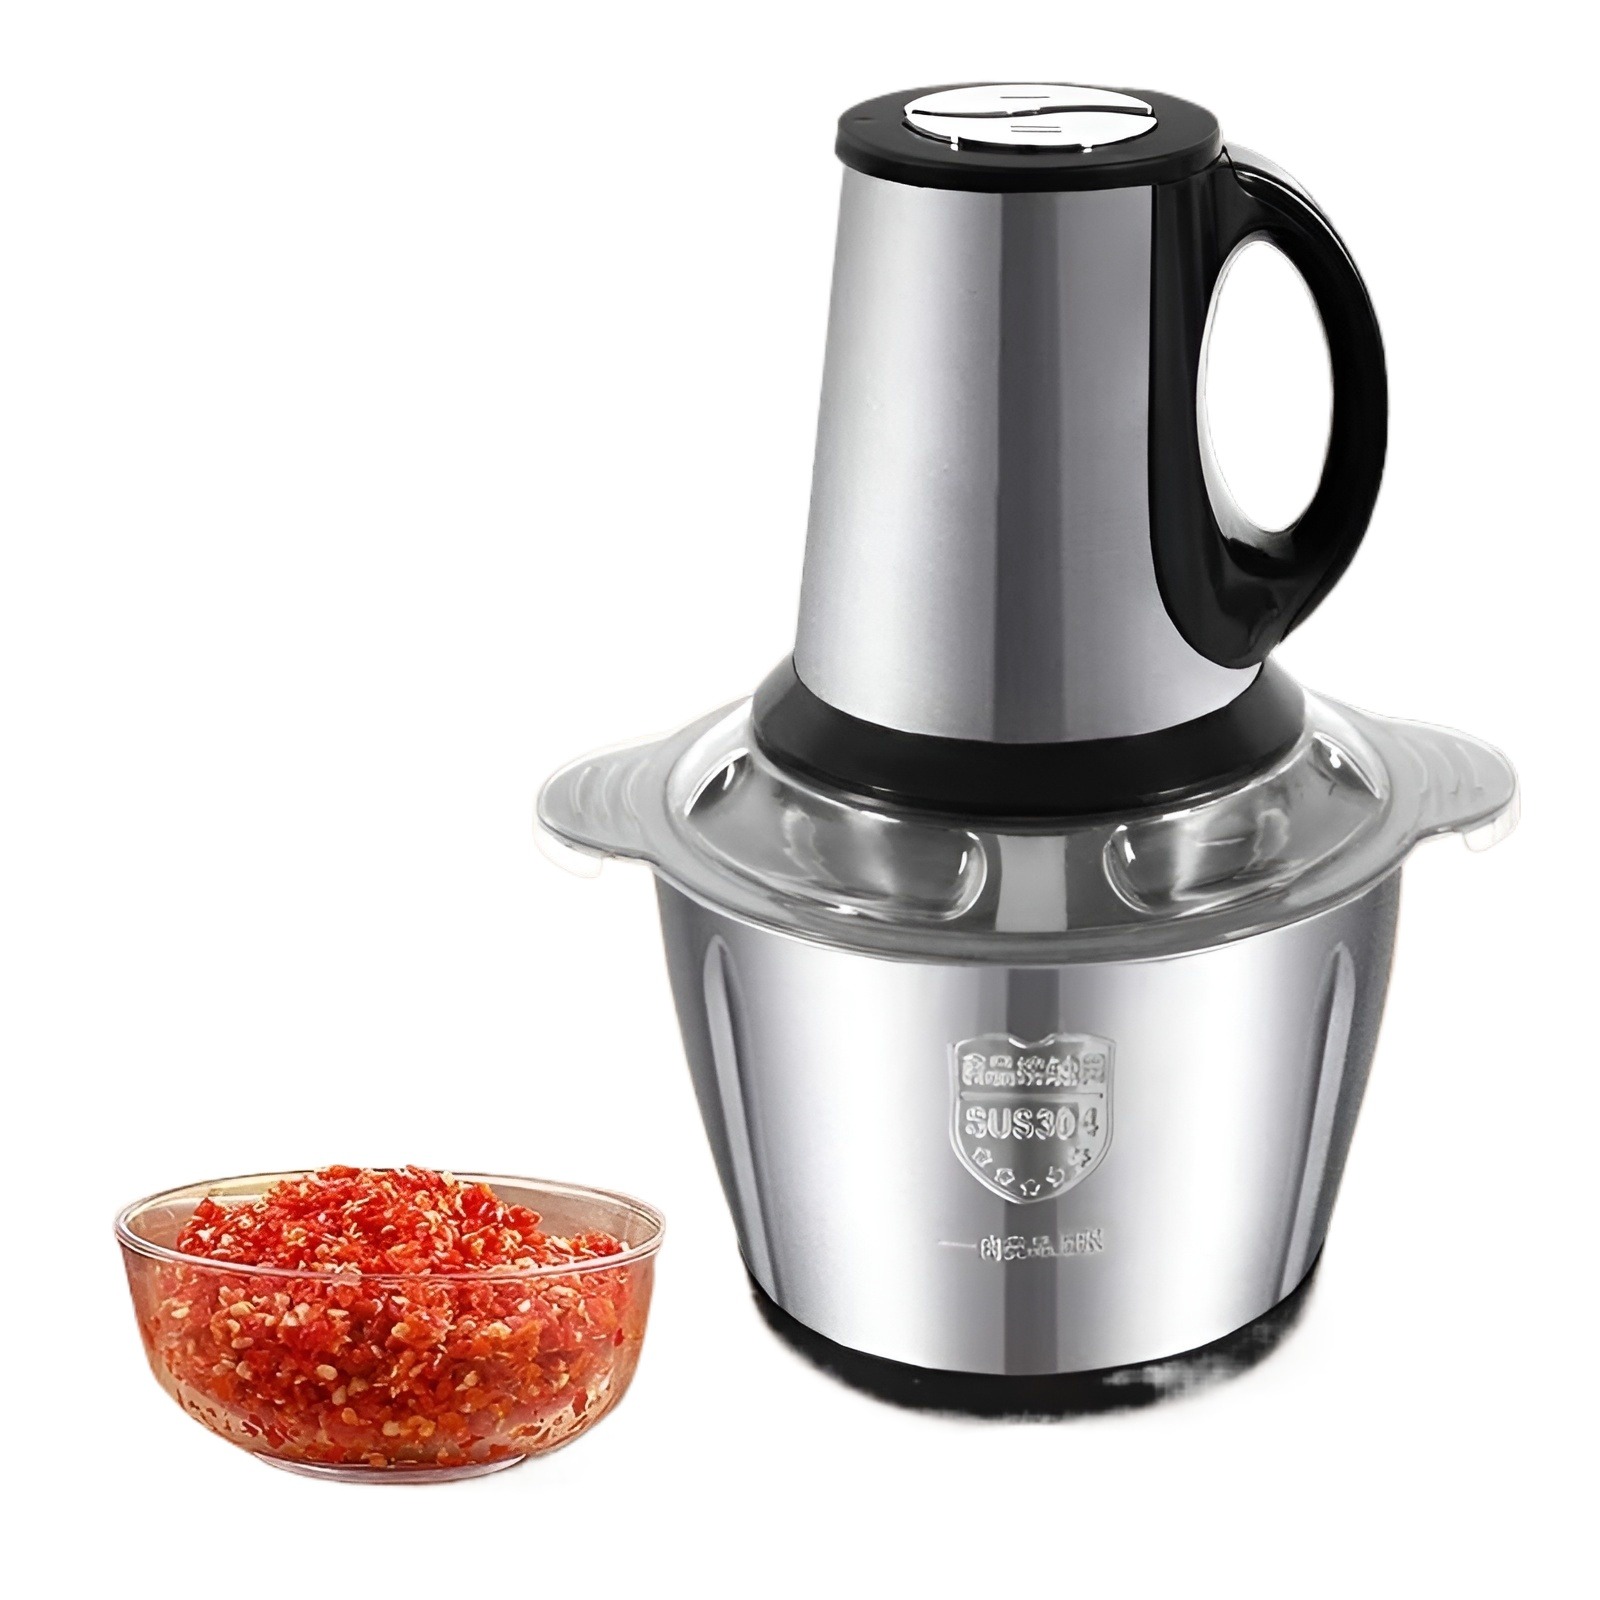 Manual Crank Chop Food Processor With Japanese Blades, Online Shopping in  Nepal, Shop Online, Delivery all over Nepal